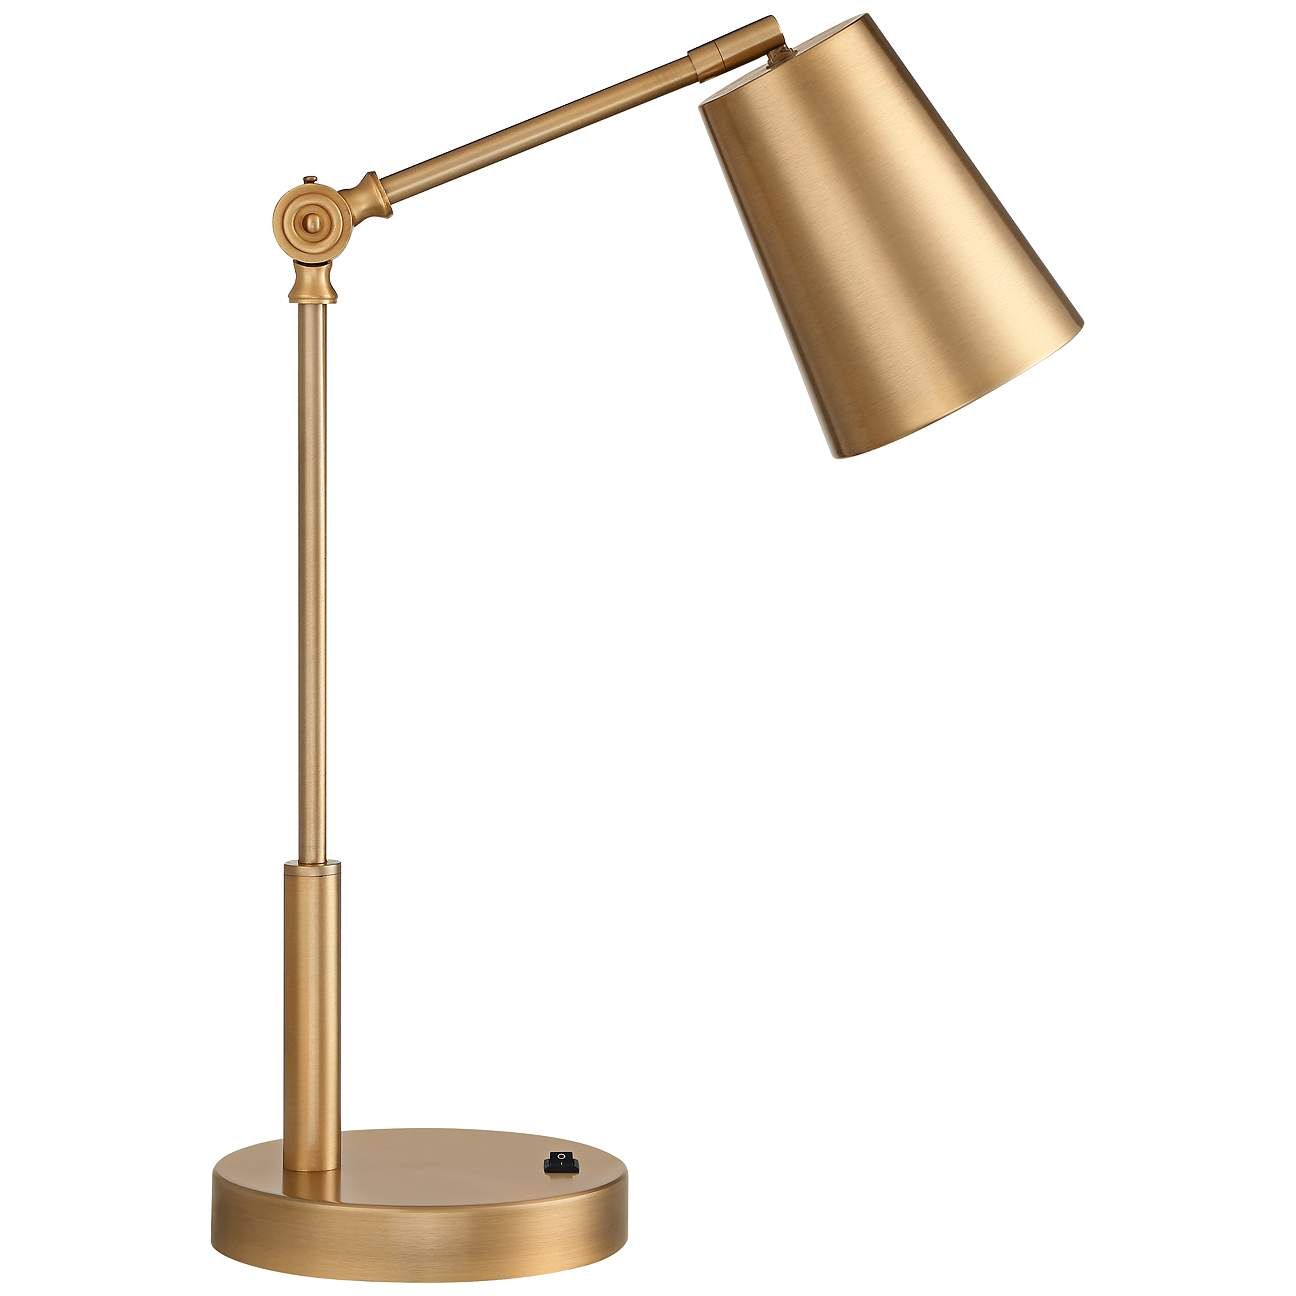 Sully Warm Brass Desk Lamp with Double USB Ports | Lamps Plus